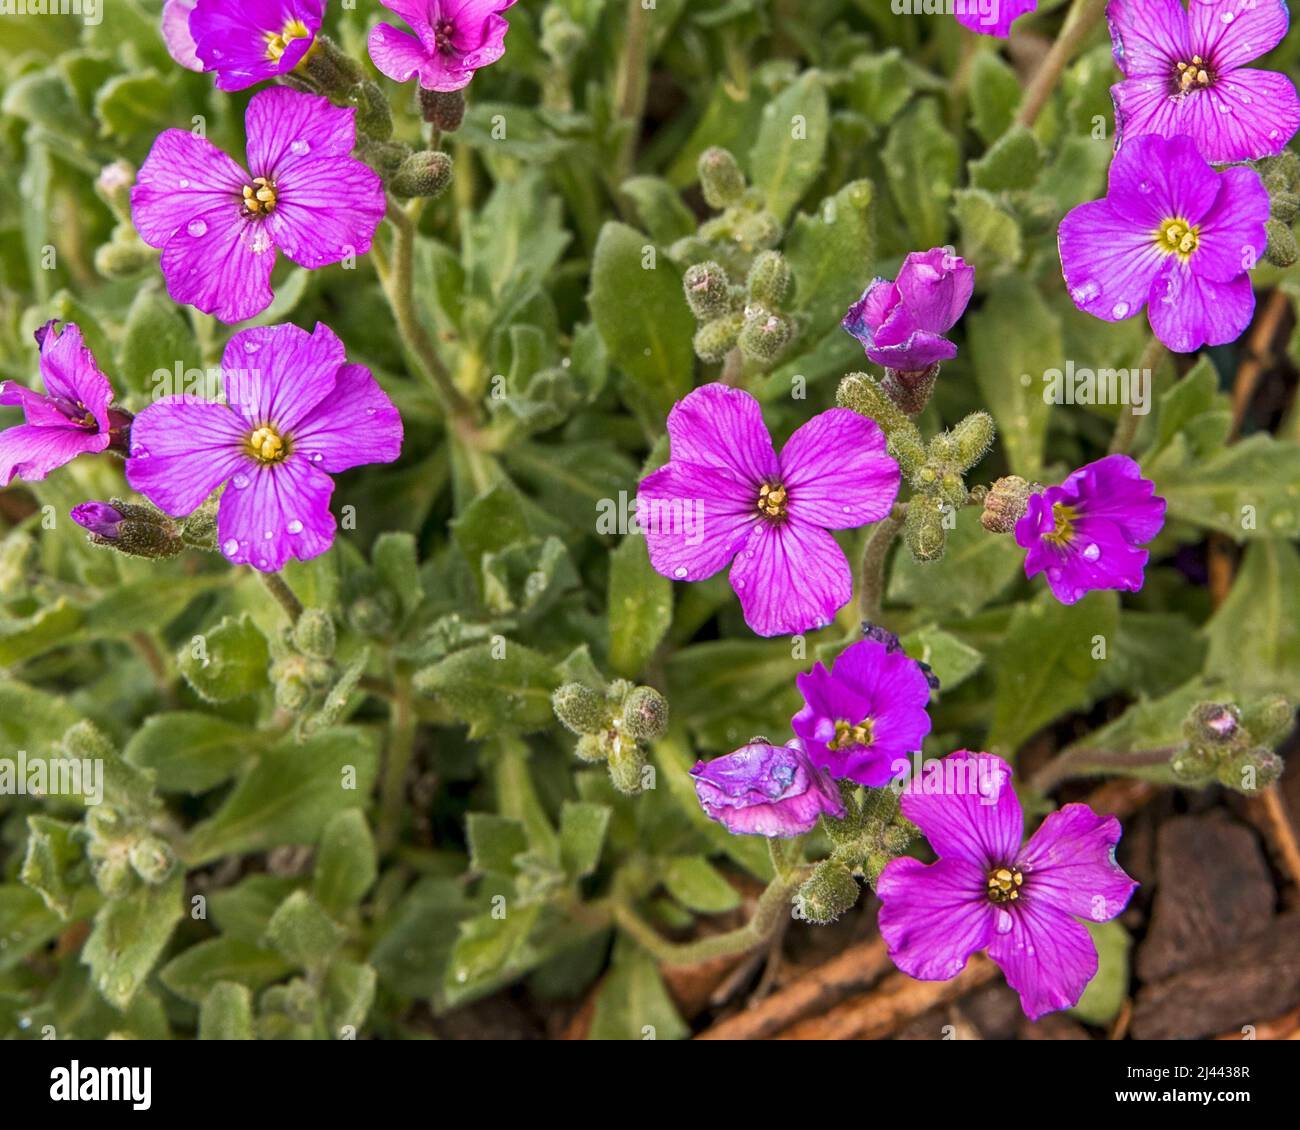 Small purple flowers blossoming in the spring sunshine Stock Photo